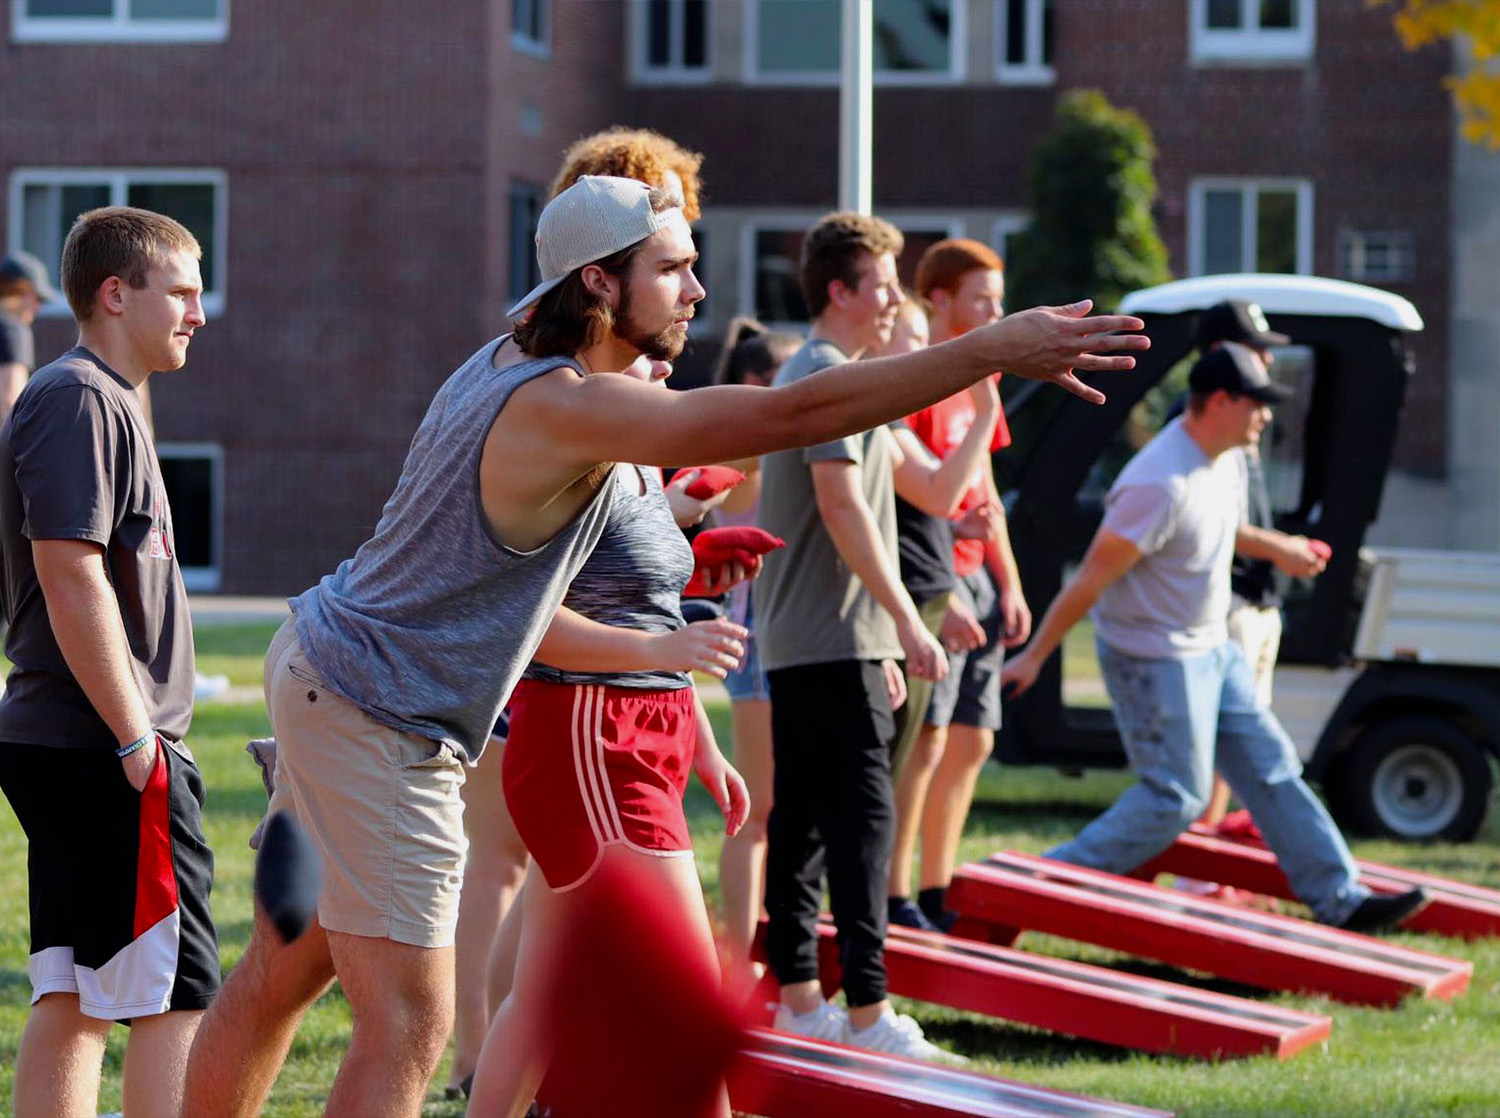 Students participate in a bag toss tournament